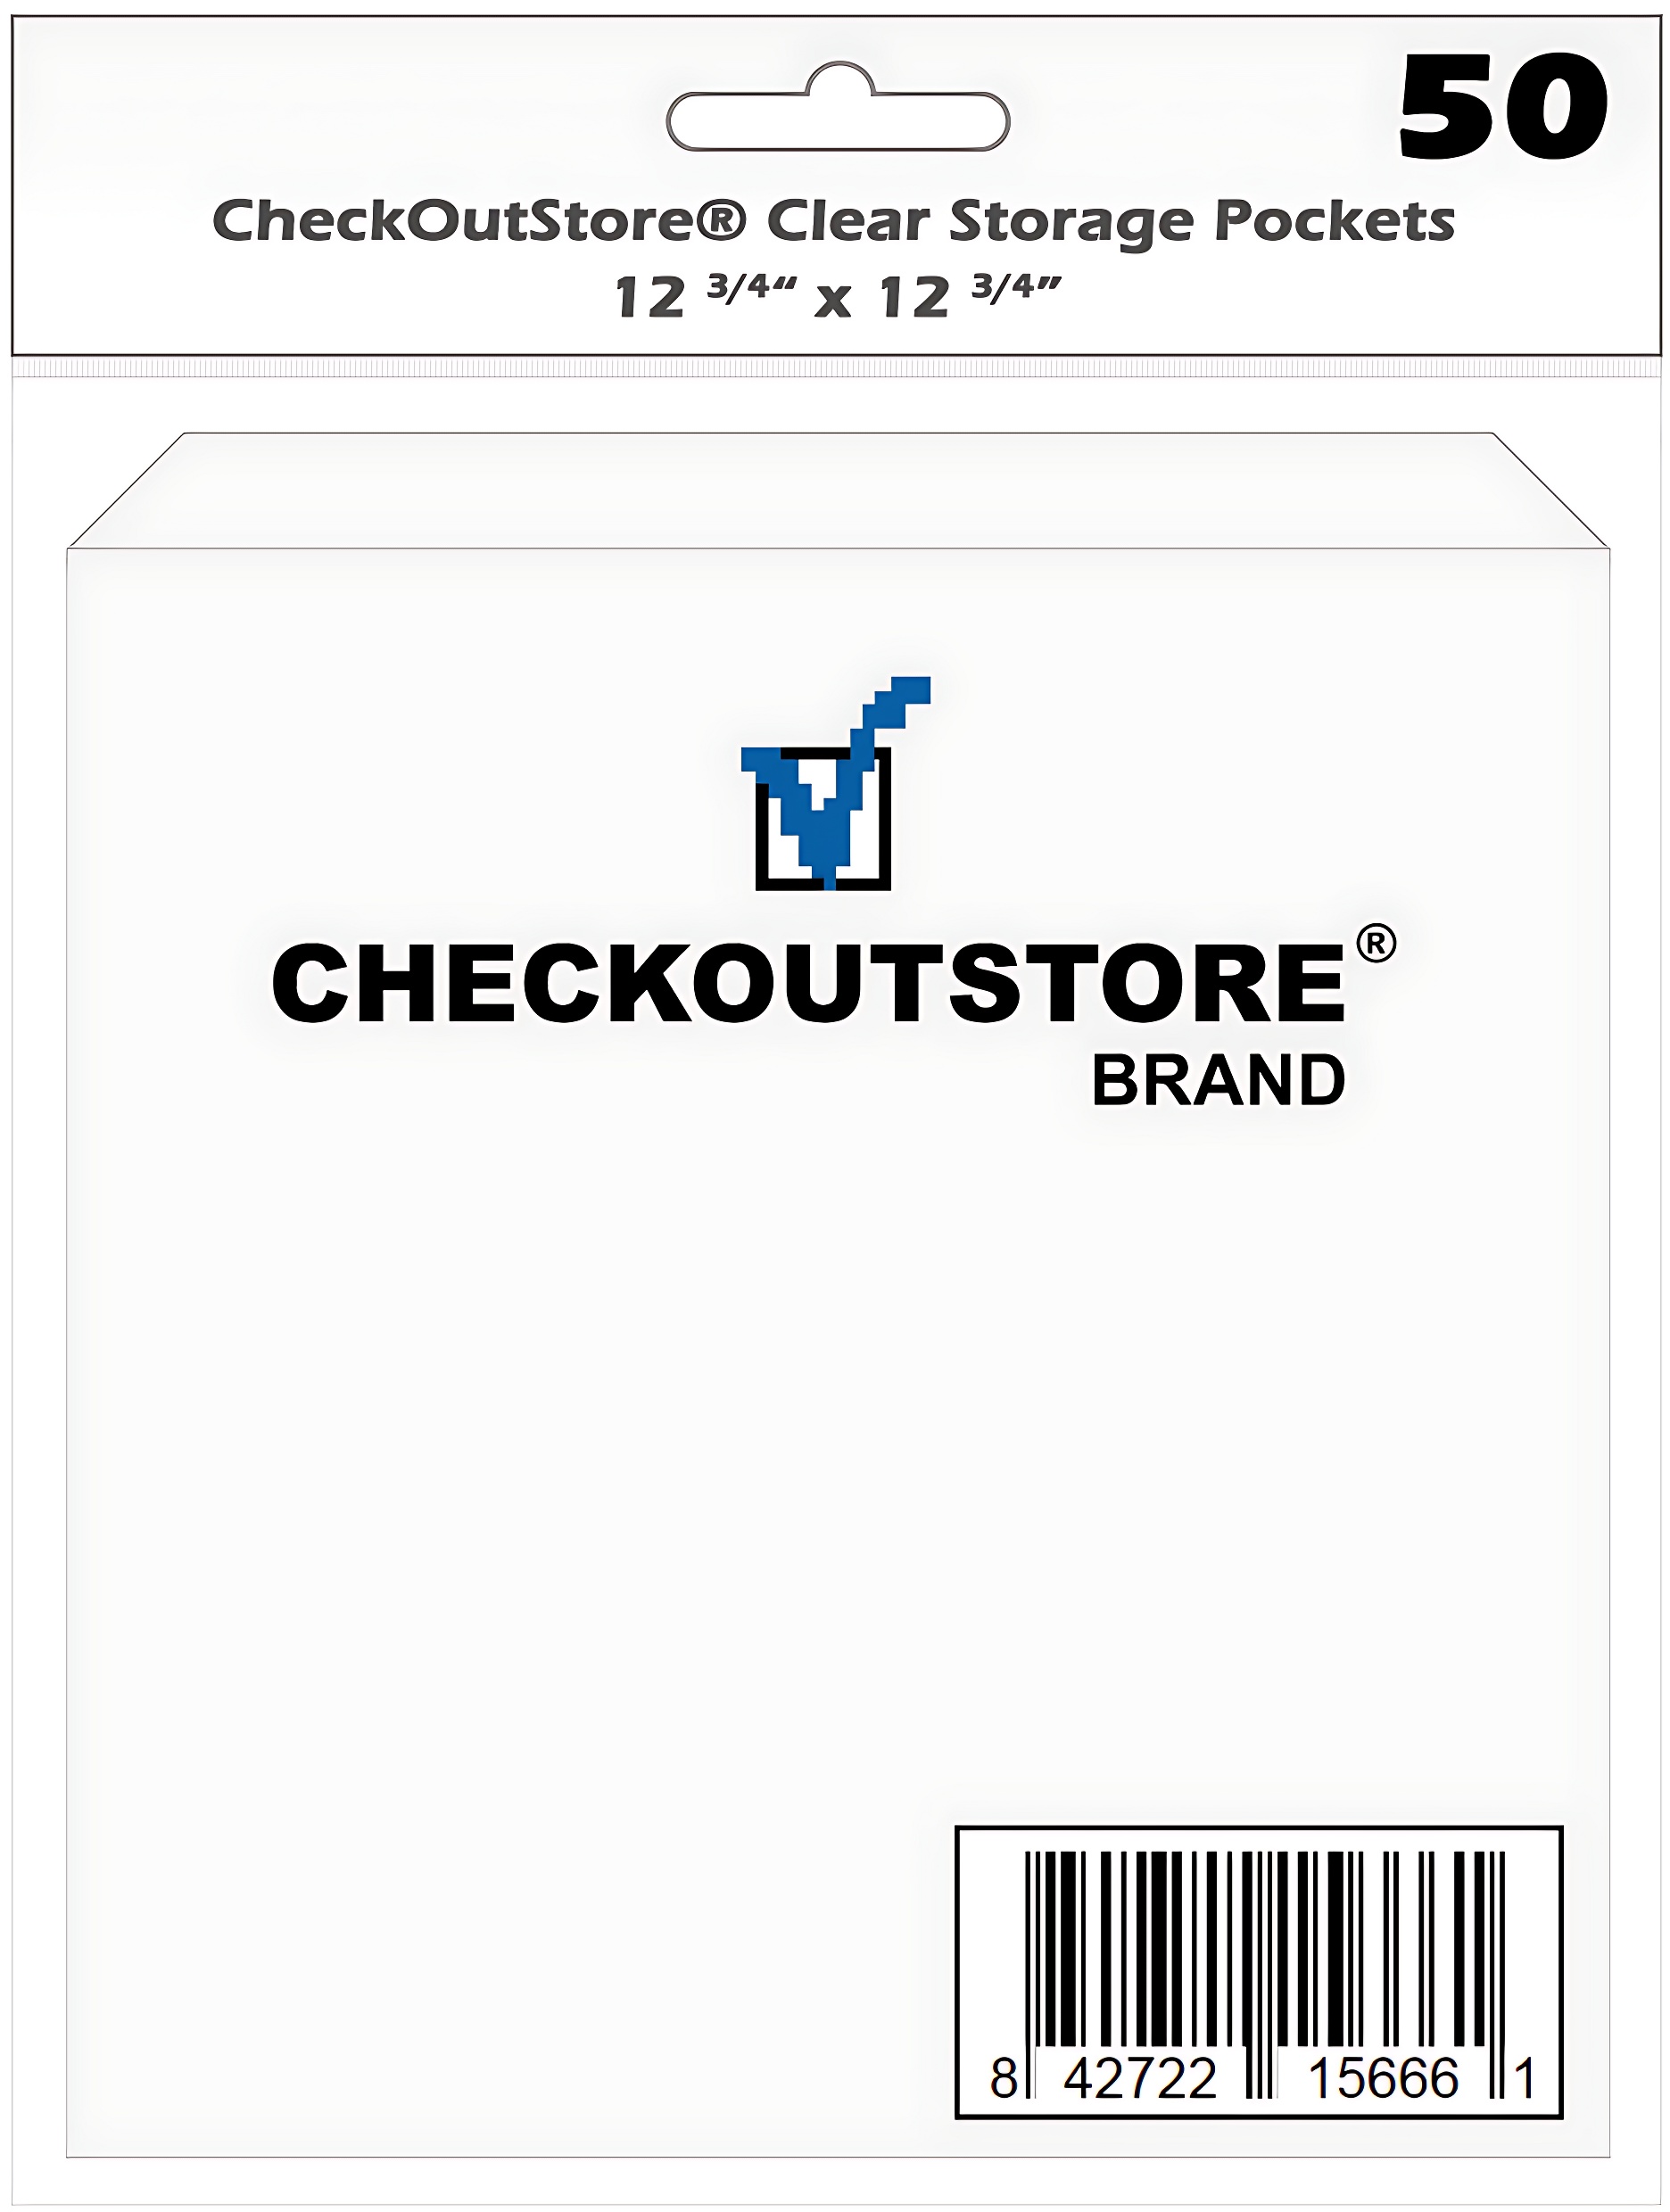 Image of ID 1284073552 2000 CheckOutStore Cardstock Clear Storage Pockets (12 3/4 x 12 3/4)